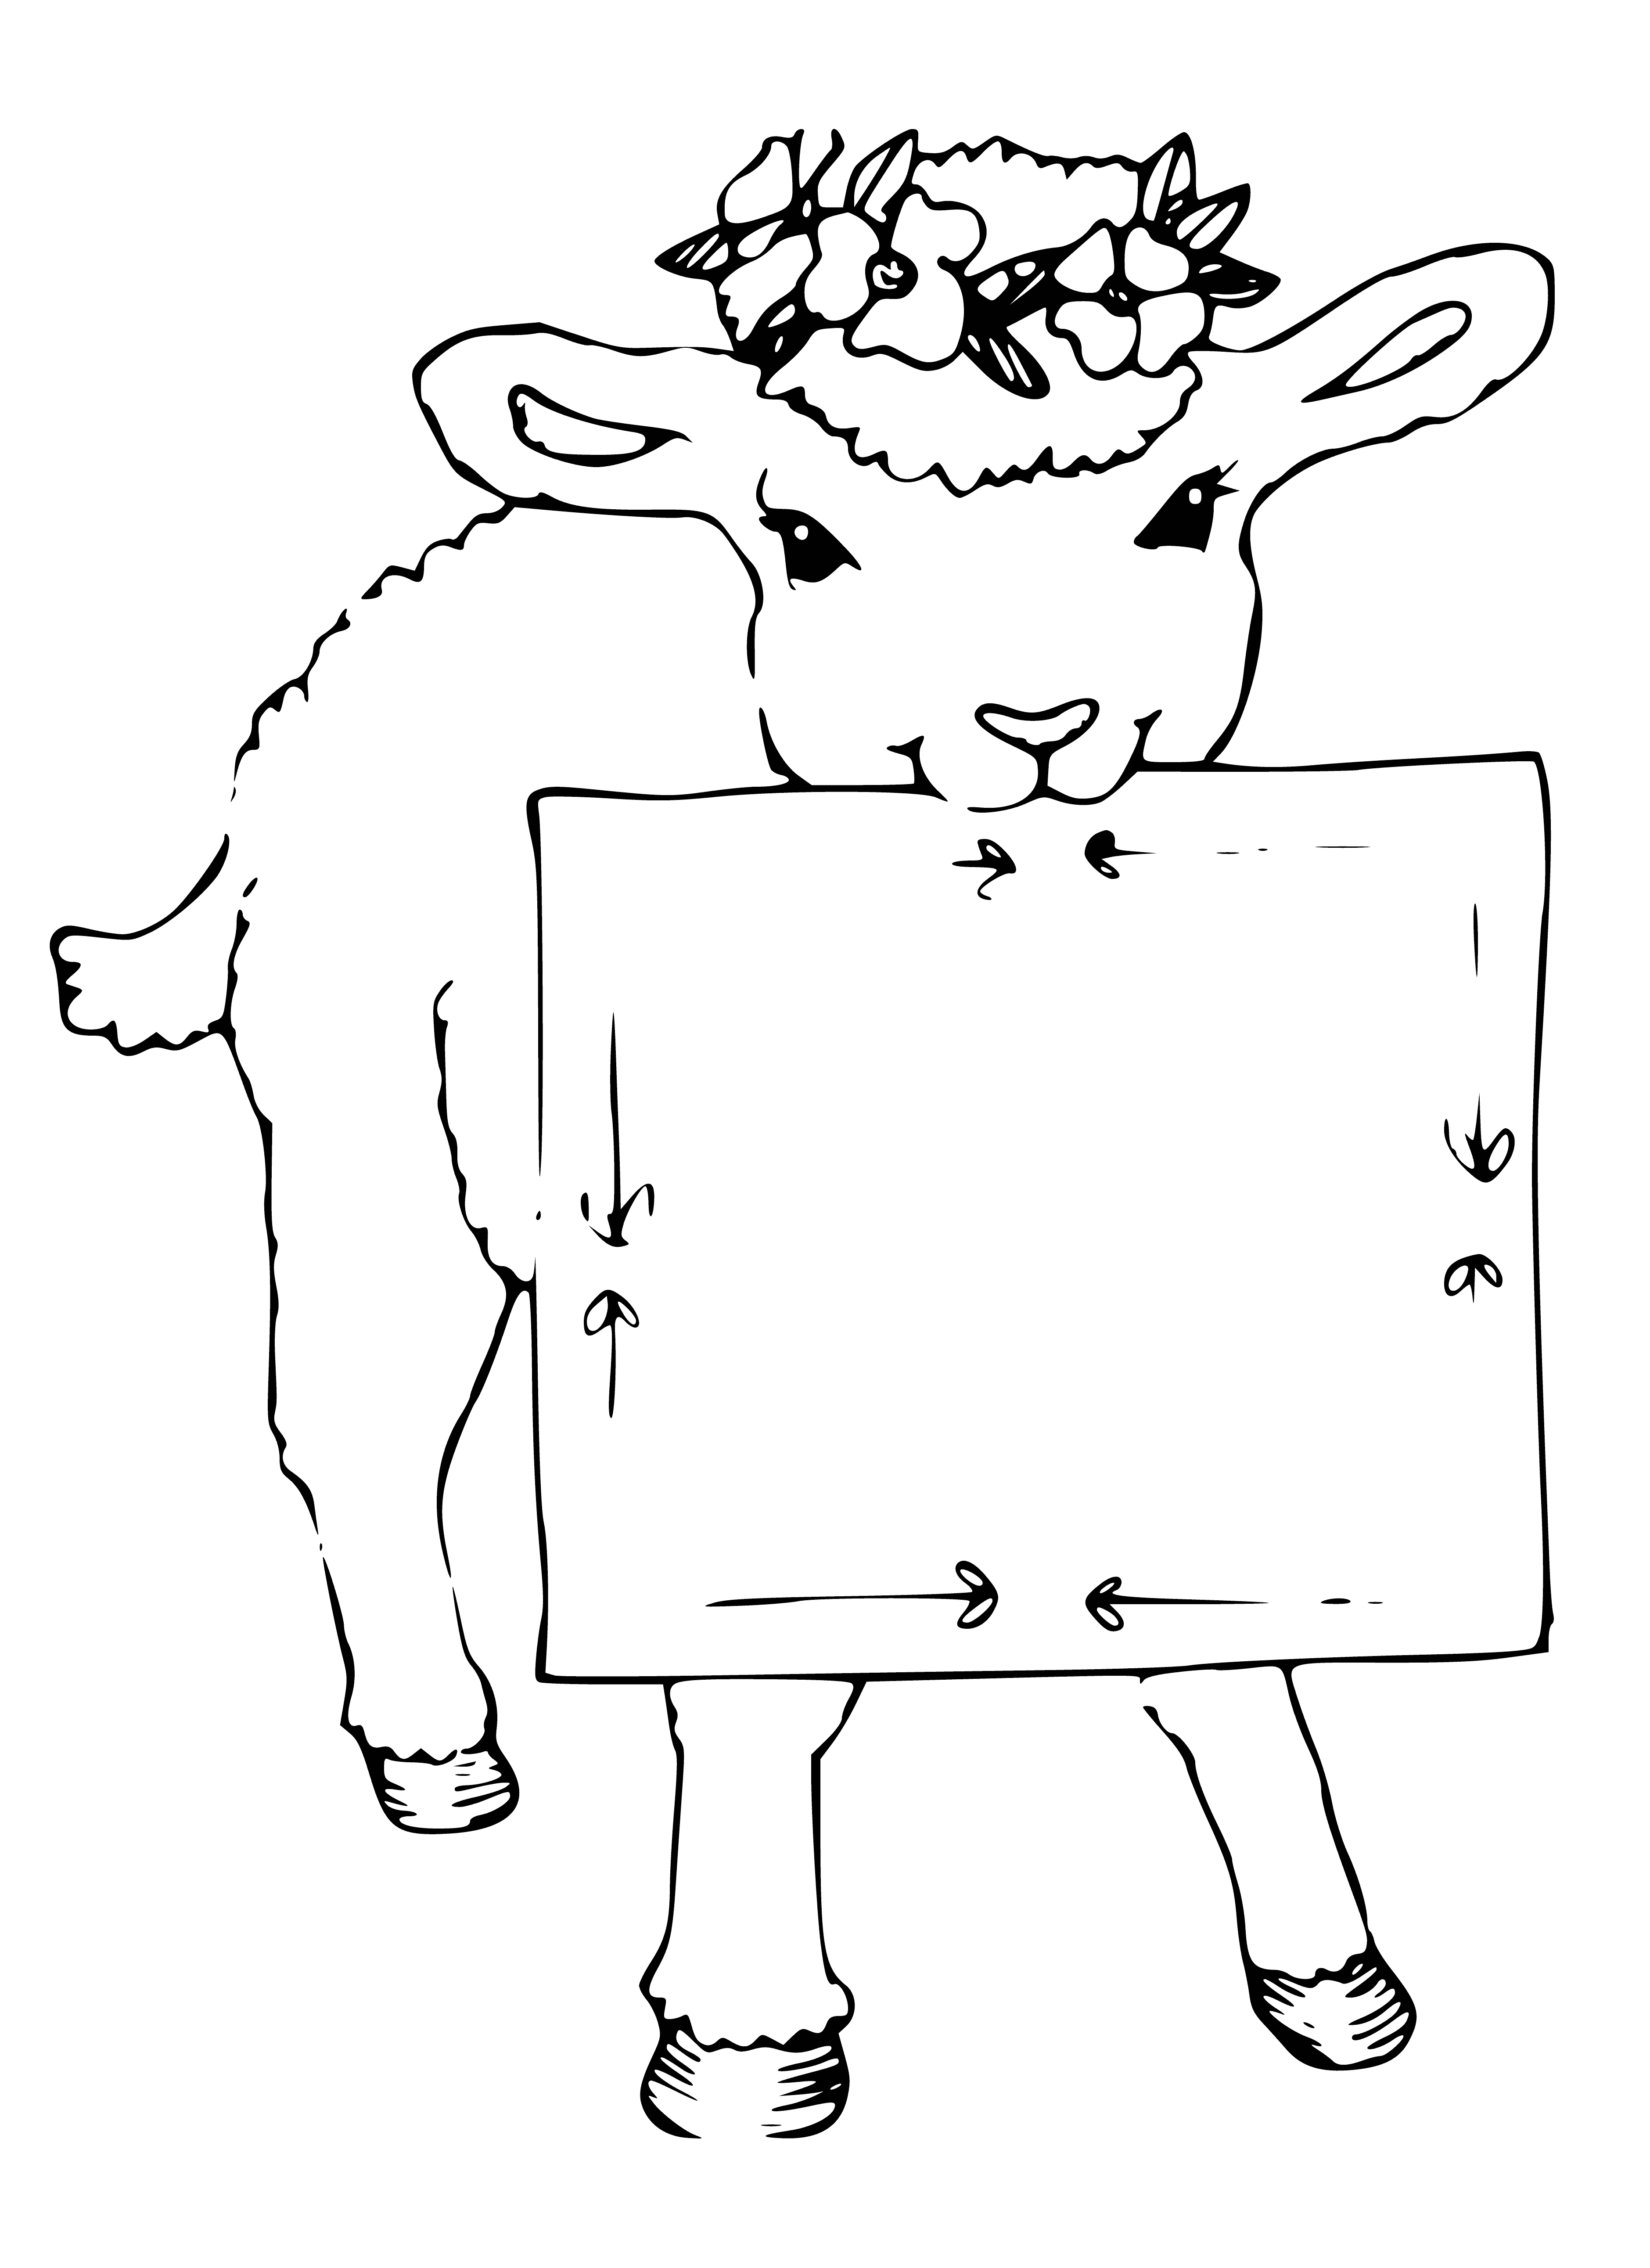 Sheep with an eyelid on its head coloring page